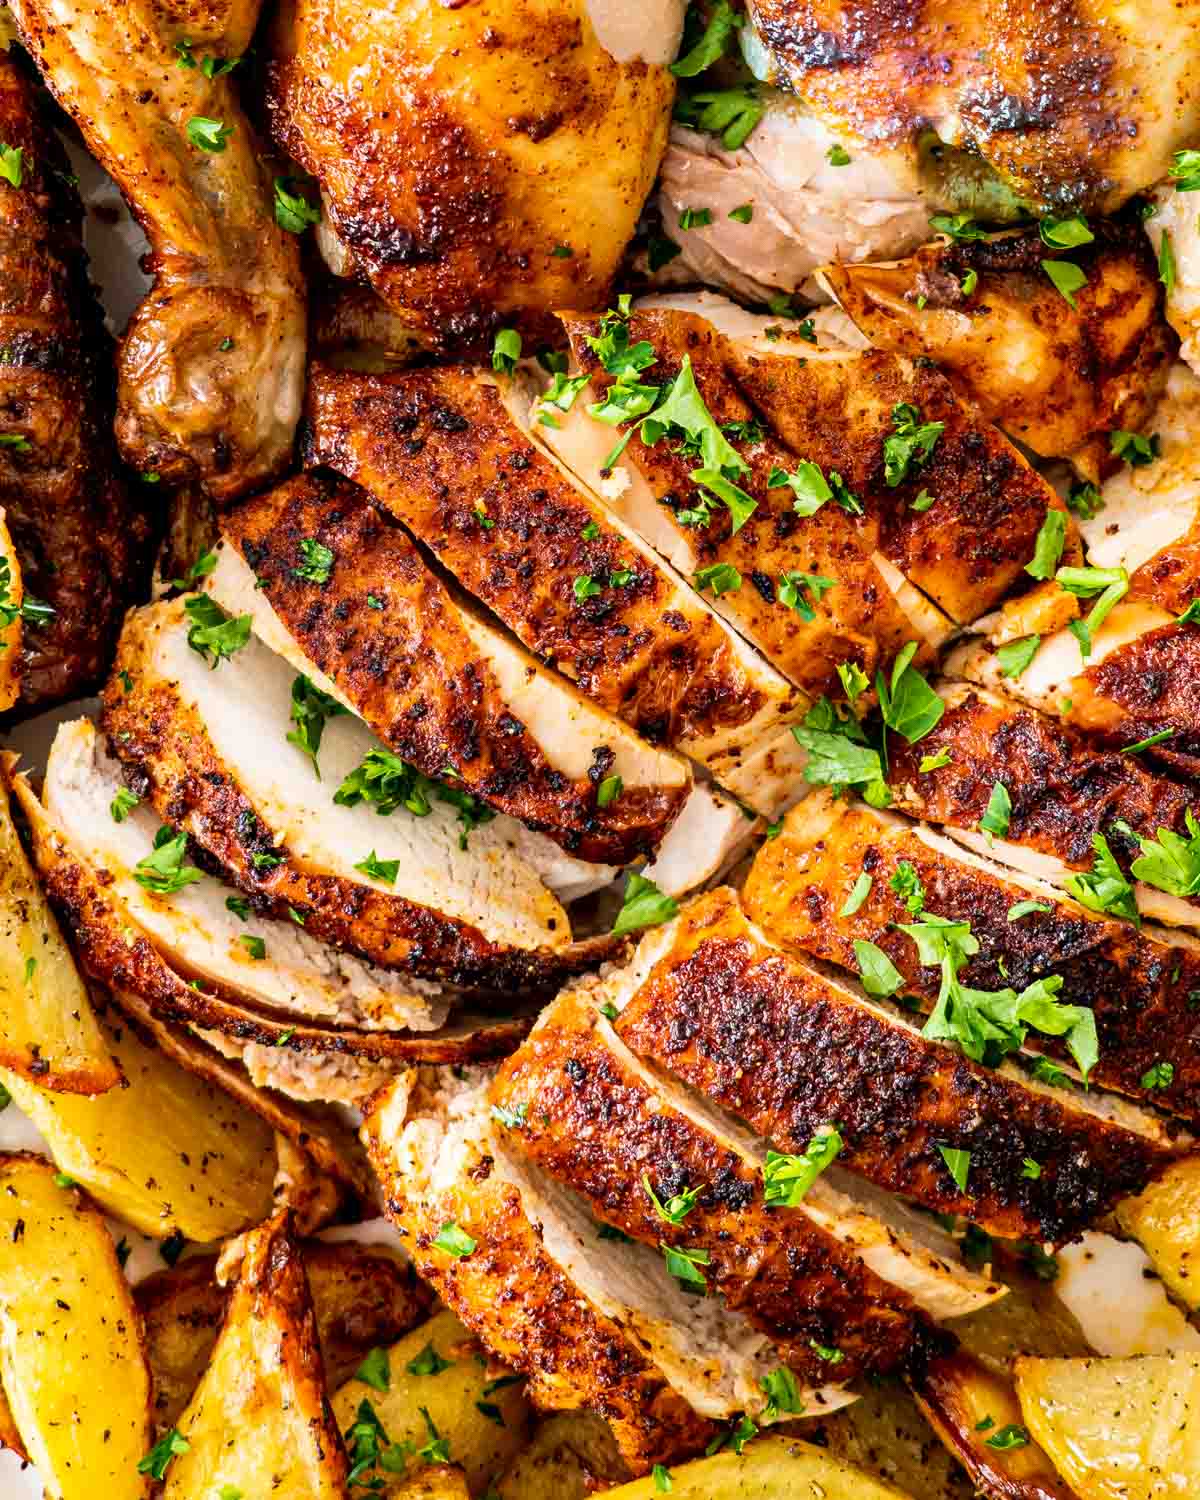 cut up roasted chicken breasts garnished with parsley.